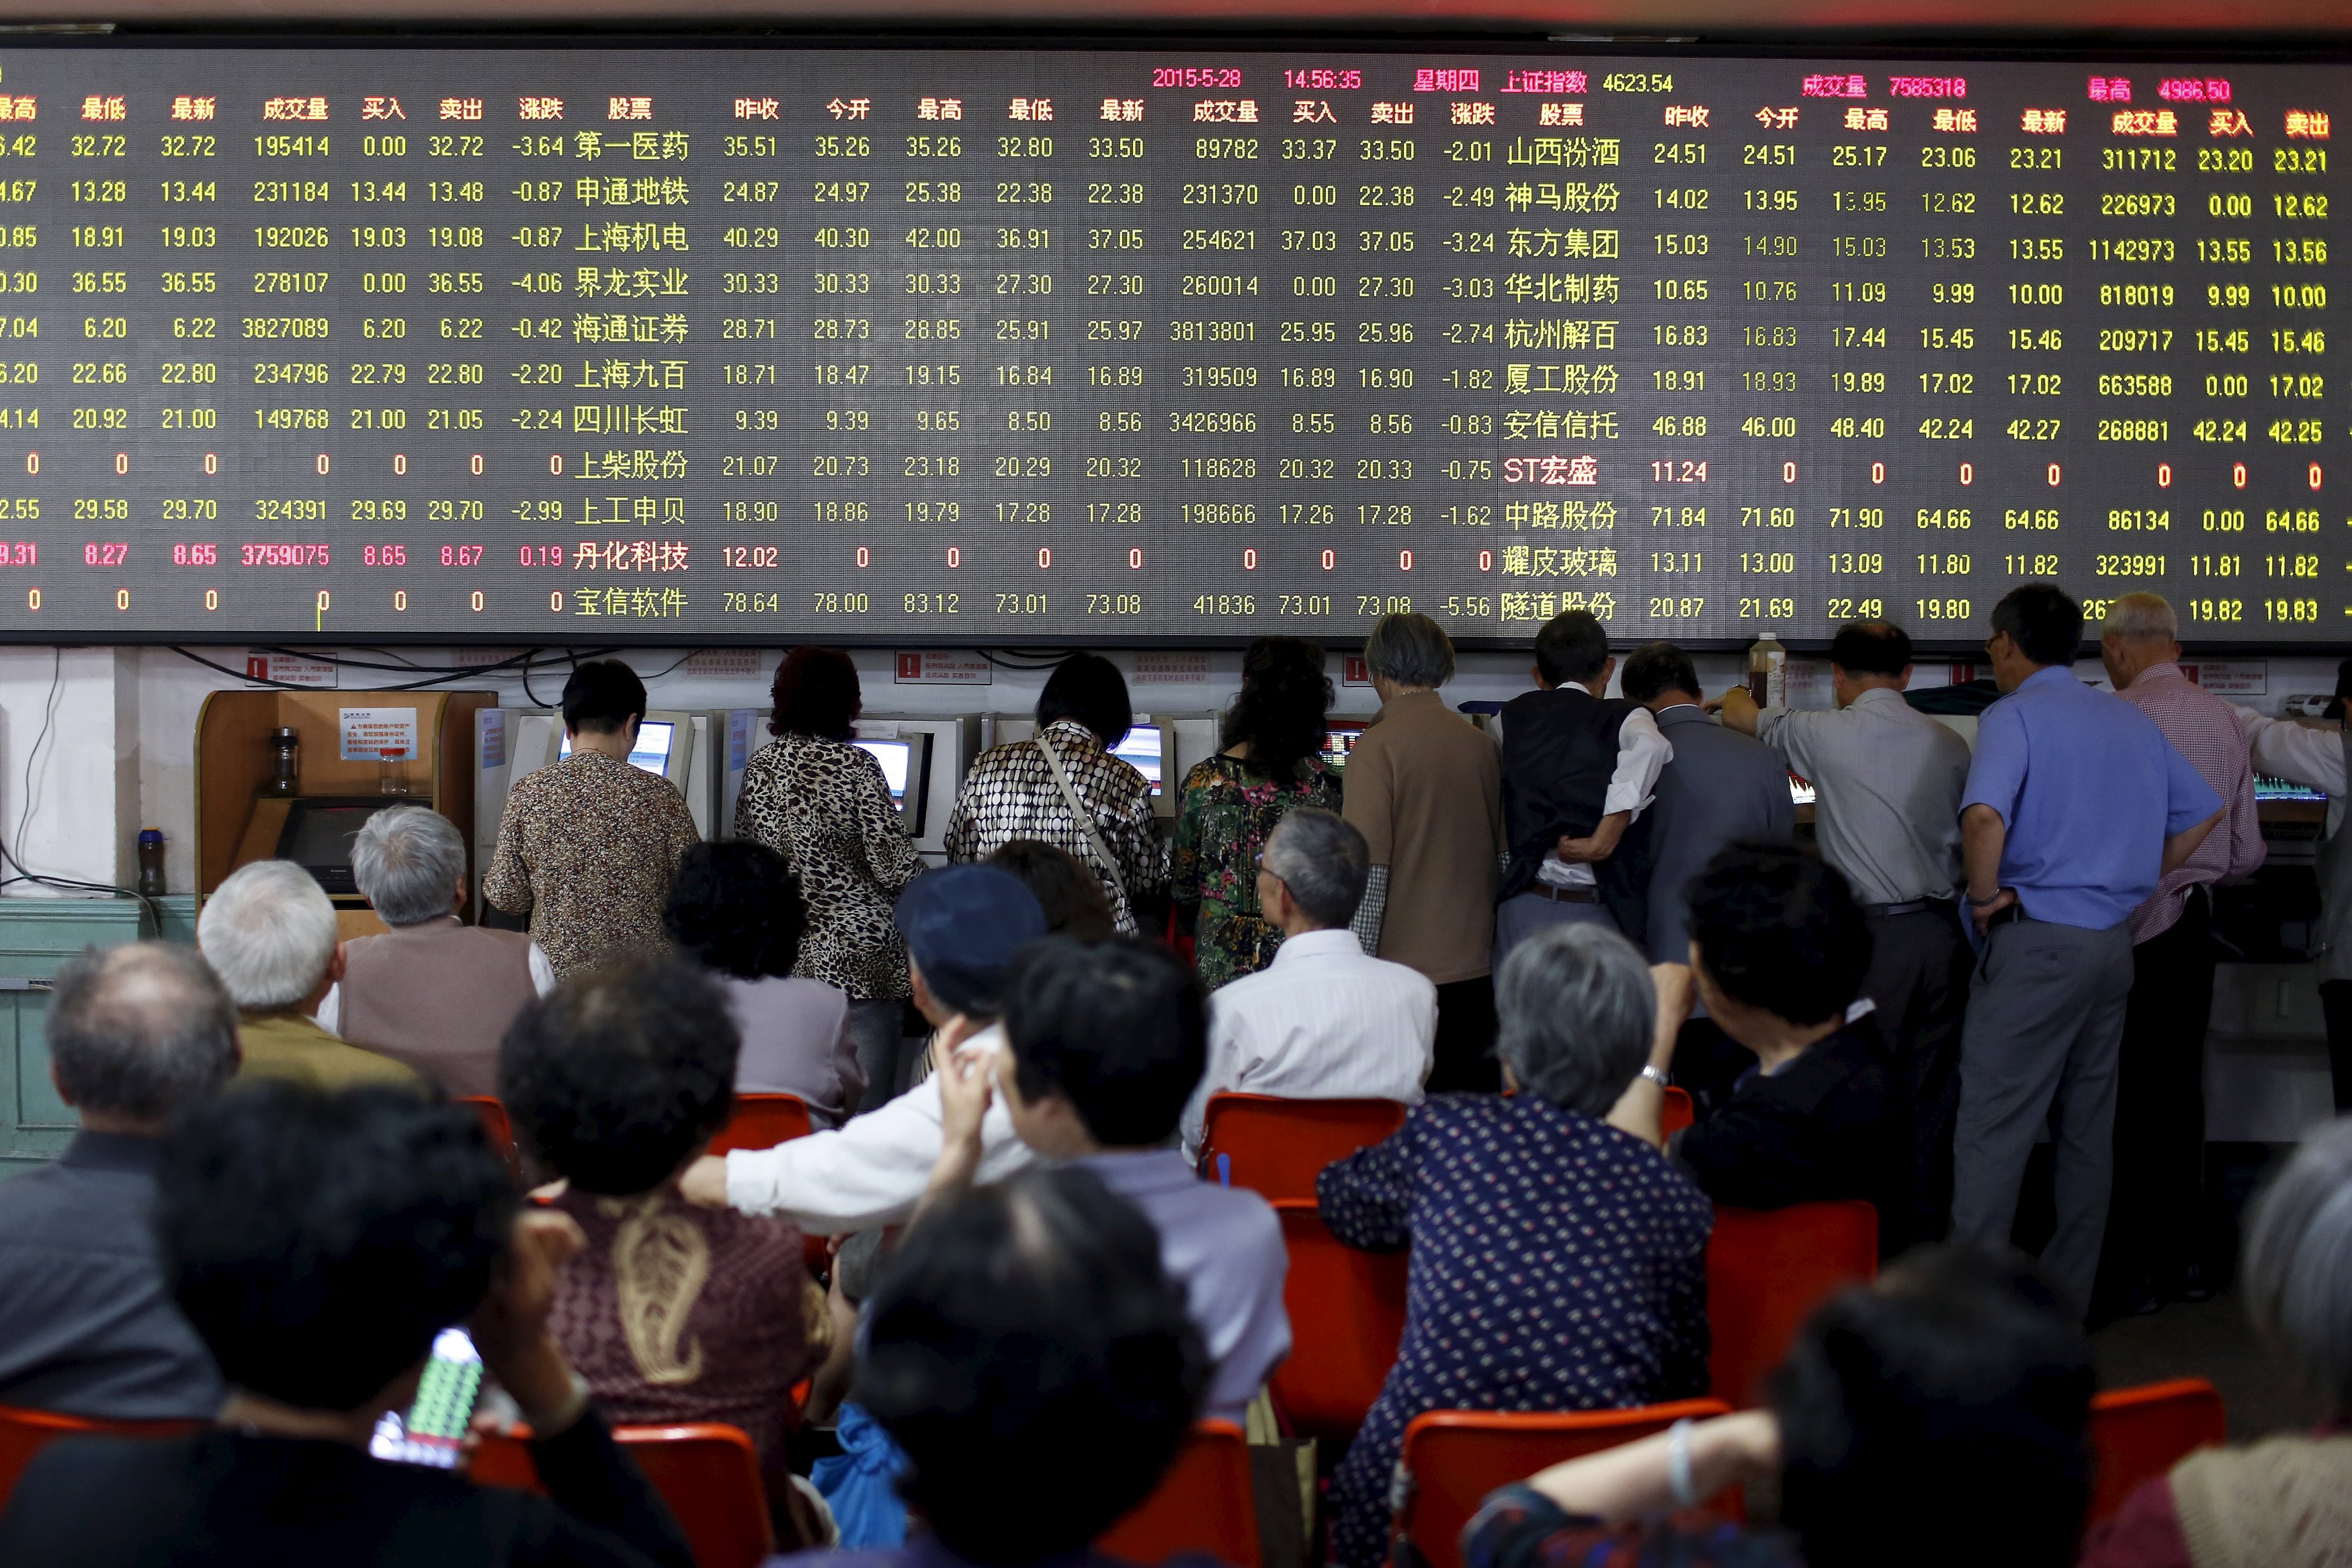 Investors in Shanghai monitor stock prices as punters piled in on surging share values as the fear of missing out on the next big thing spurred buying in Chinese markets. Photo: Reuters